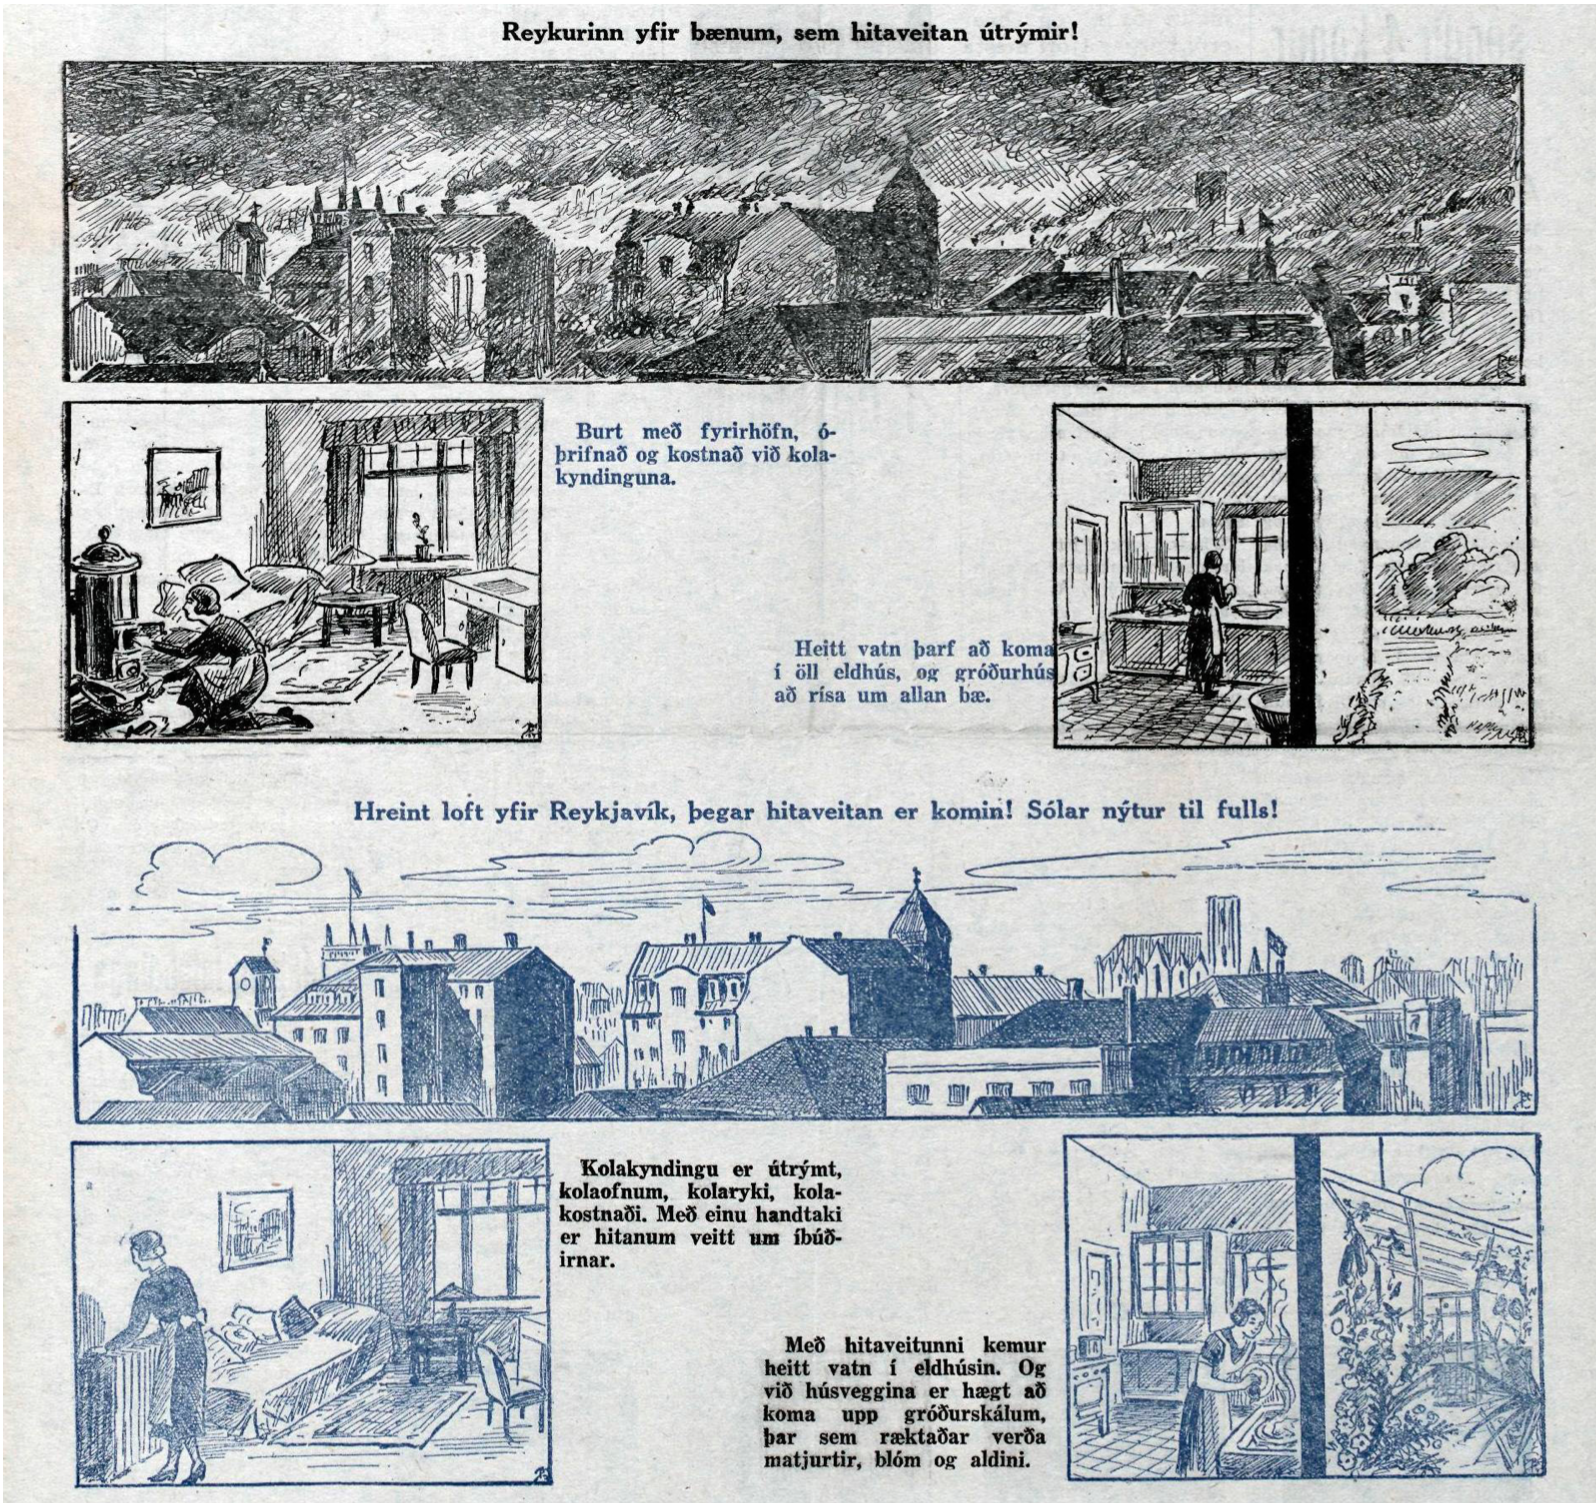 Figure 2: Captions from top to bottom: a) The cloud of smoke above town, which will be banished by the heating utility! b) Avoid the labour, filth and cost of coal heating. c) Hot water shall be brought into every kitchen, and greenhouses will rise around town. d) Clean air above Reykjavík, once the heating utility is here! The sunshine will be enjoyable to the utmost! e) Coal heating will be eradicated and so will the coal ovens, coal dust and coal cost. With the stroke of a hand, the heat will be spread around the homes. f) With the heating utility, hot water will come into the kitchens. And by the walls of the houses, greenhouses can be raised to cultivate vegetables, flowers and fruits. Source: Icelandic National Library, “Kjósið hitaveituna í dag”, Morgunblaðið, 30/01/1938, 1. Url: http://timarit.is/view_page_init.jsp?pageId=1235245 (accessed 06/07/2021).